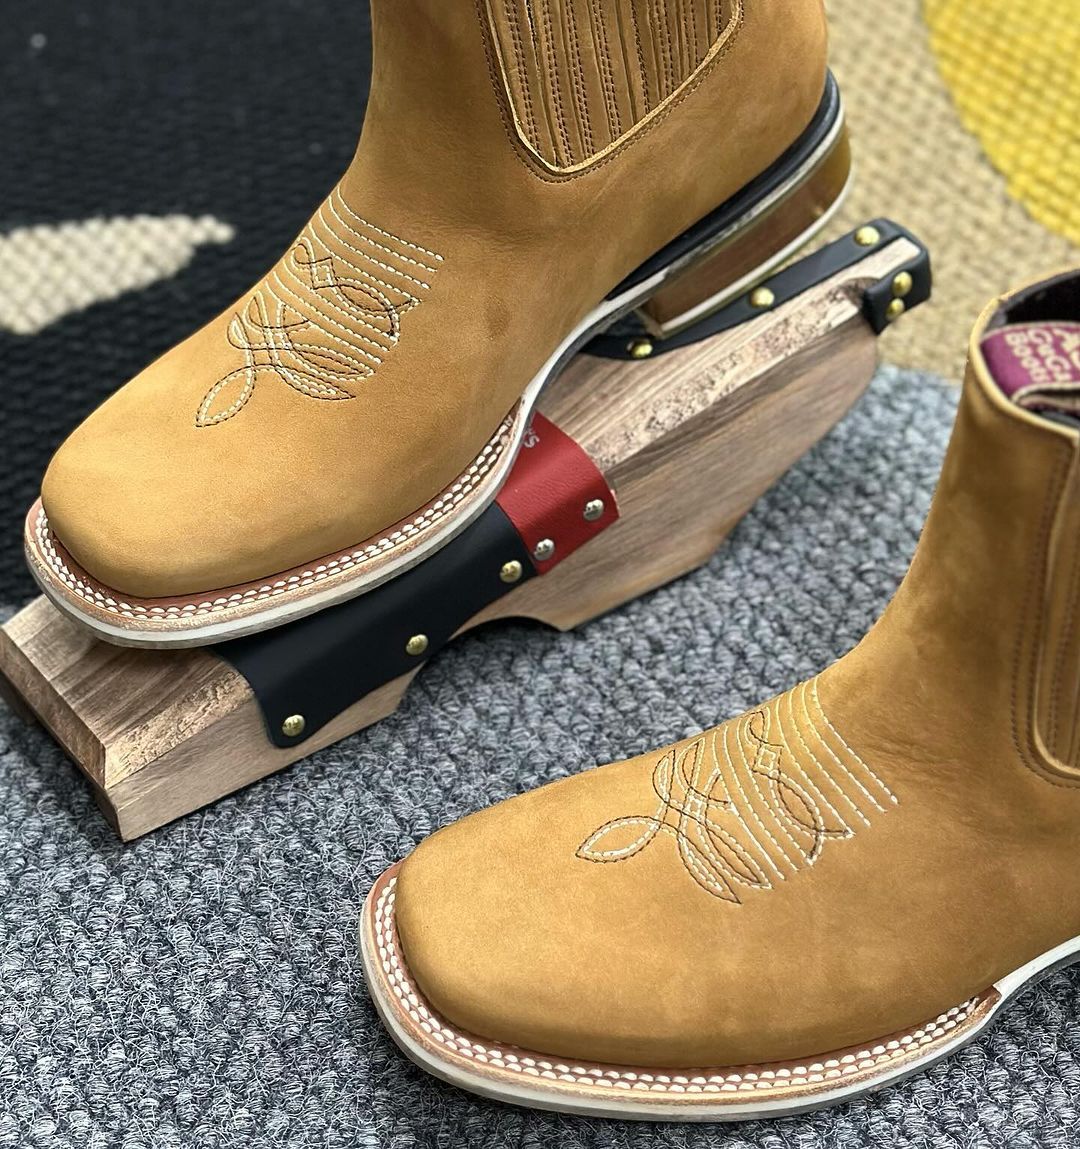 The Earl Lomo Boots